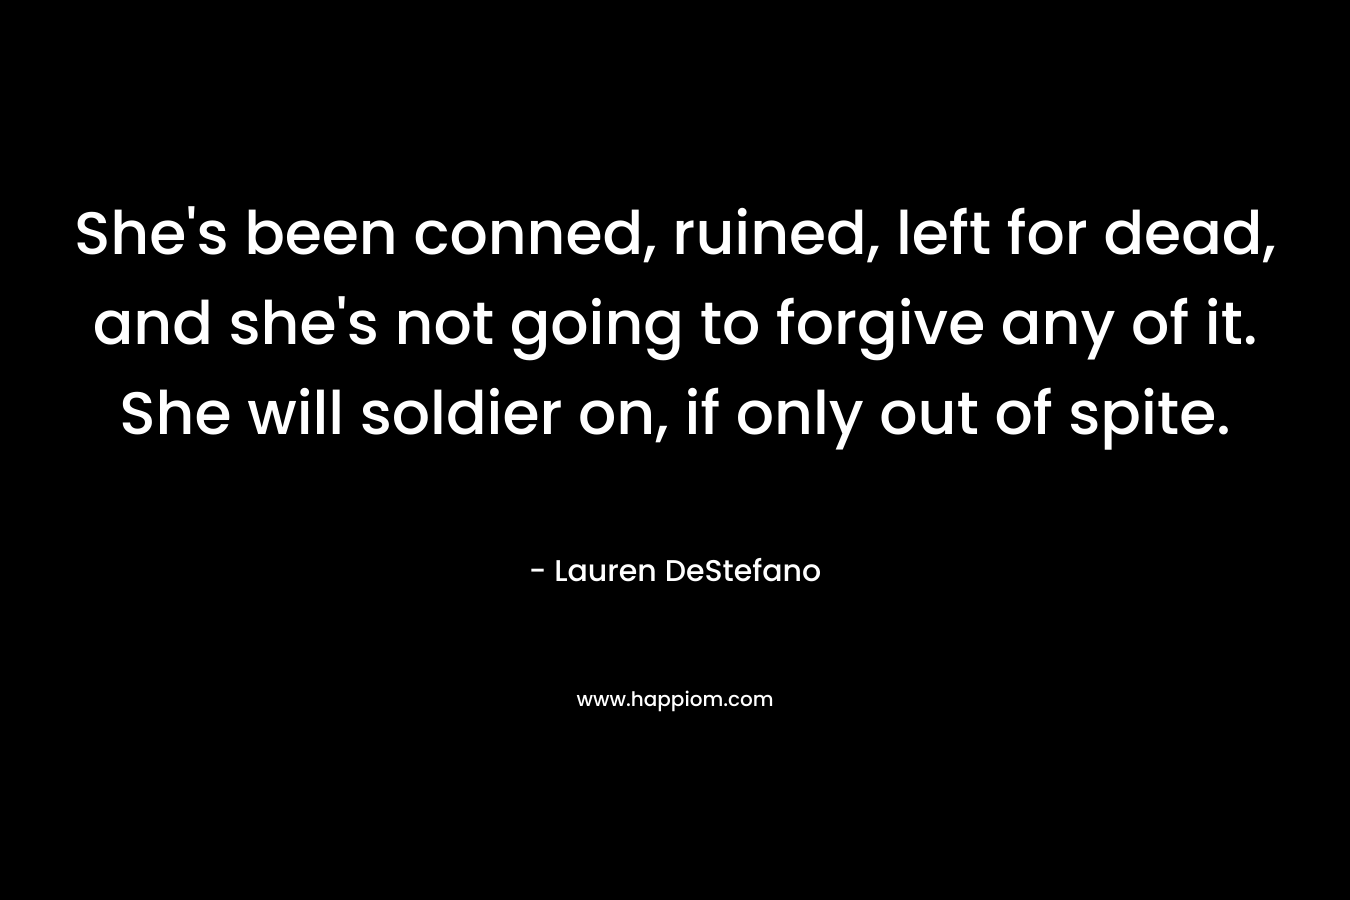 She’s been conned, ruined, left for dead, and she’s not going to forgive any of it. She will soldier on, if only out of spite. – Lauren DeStefano